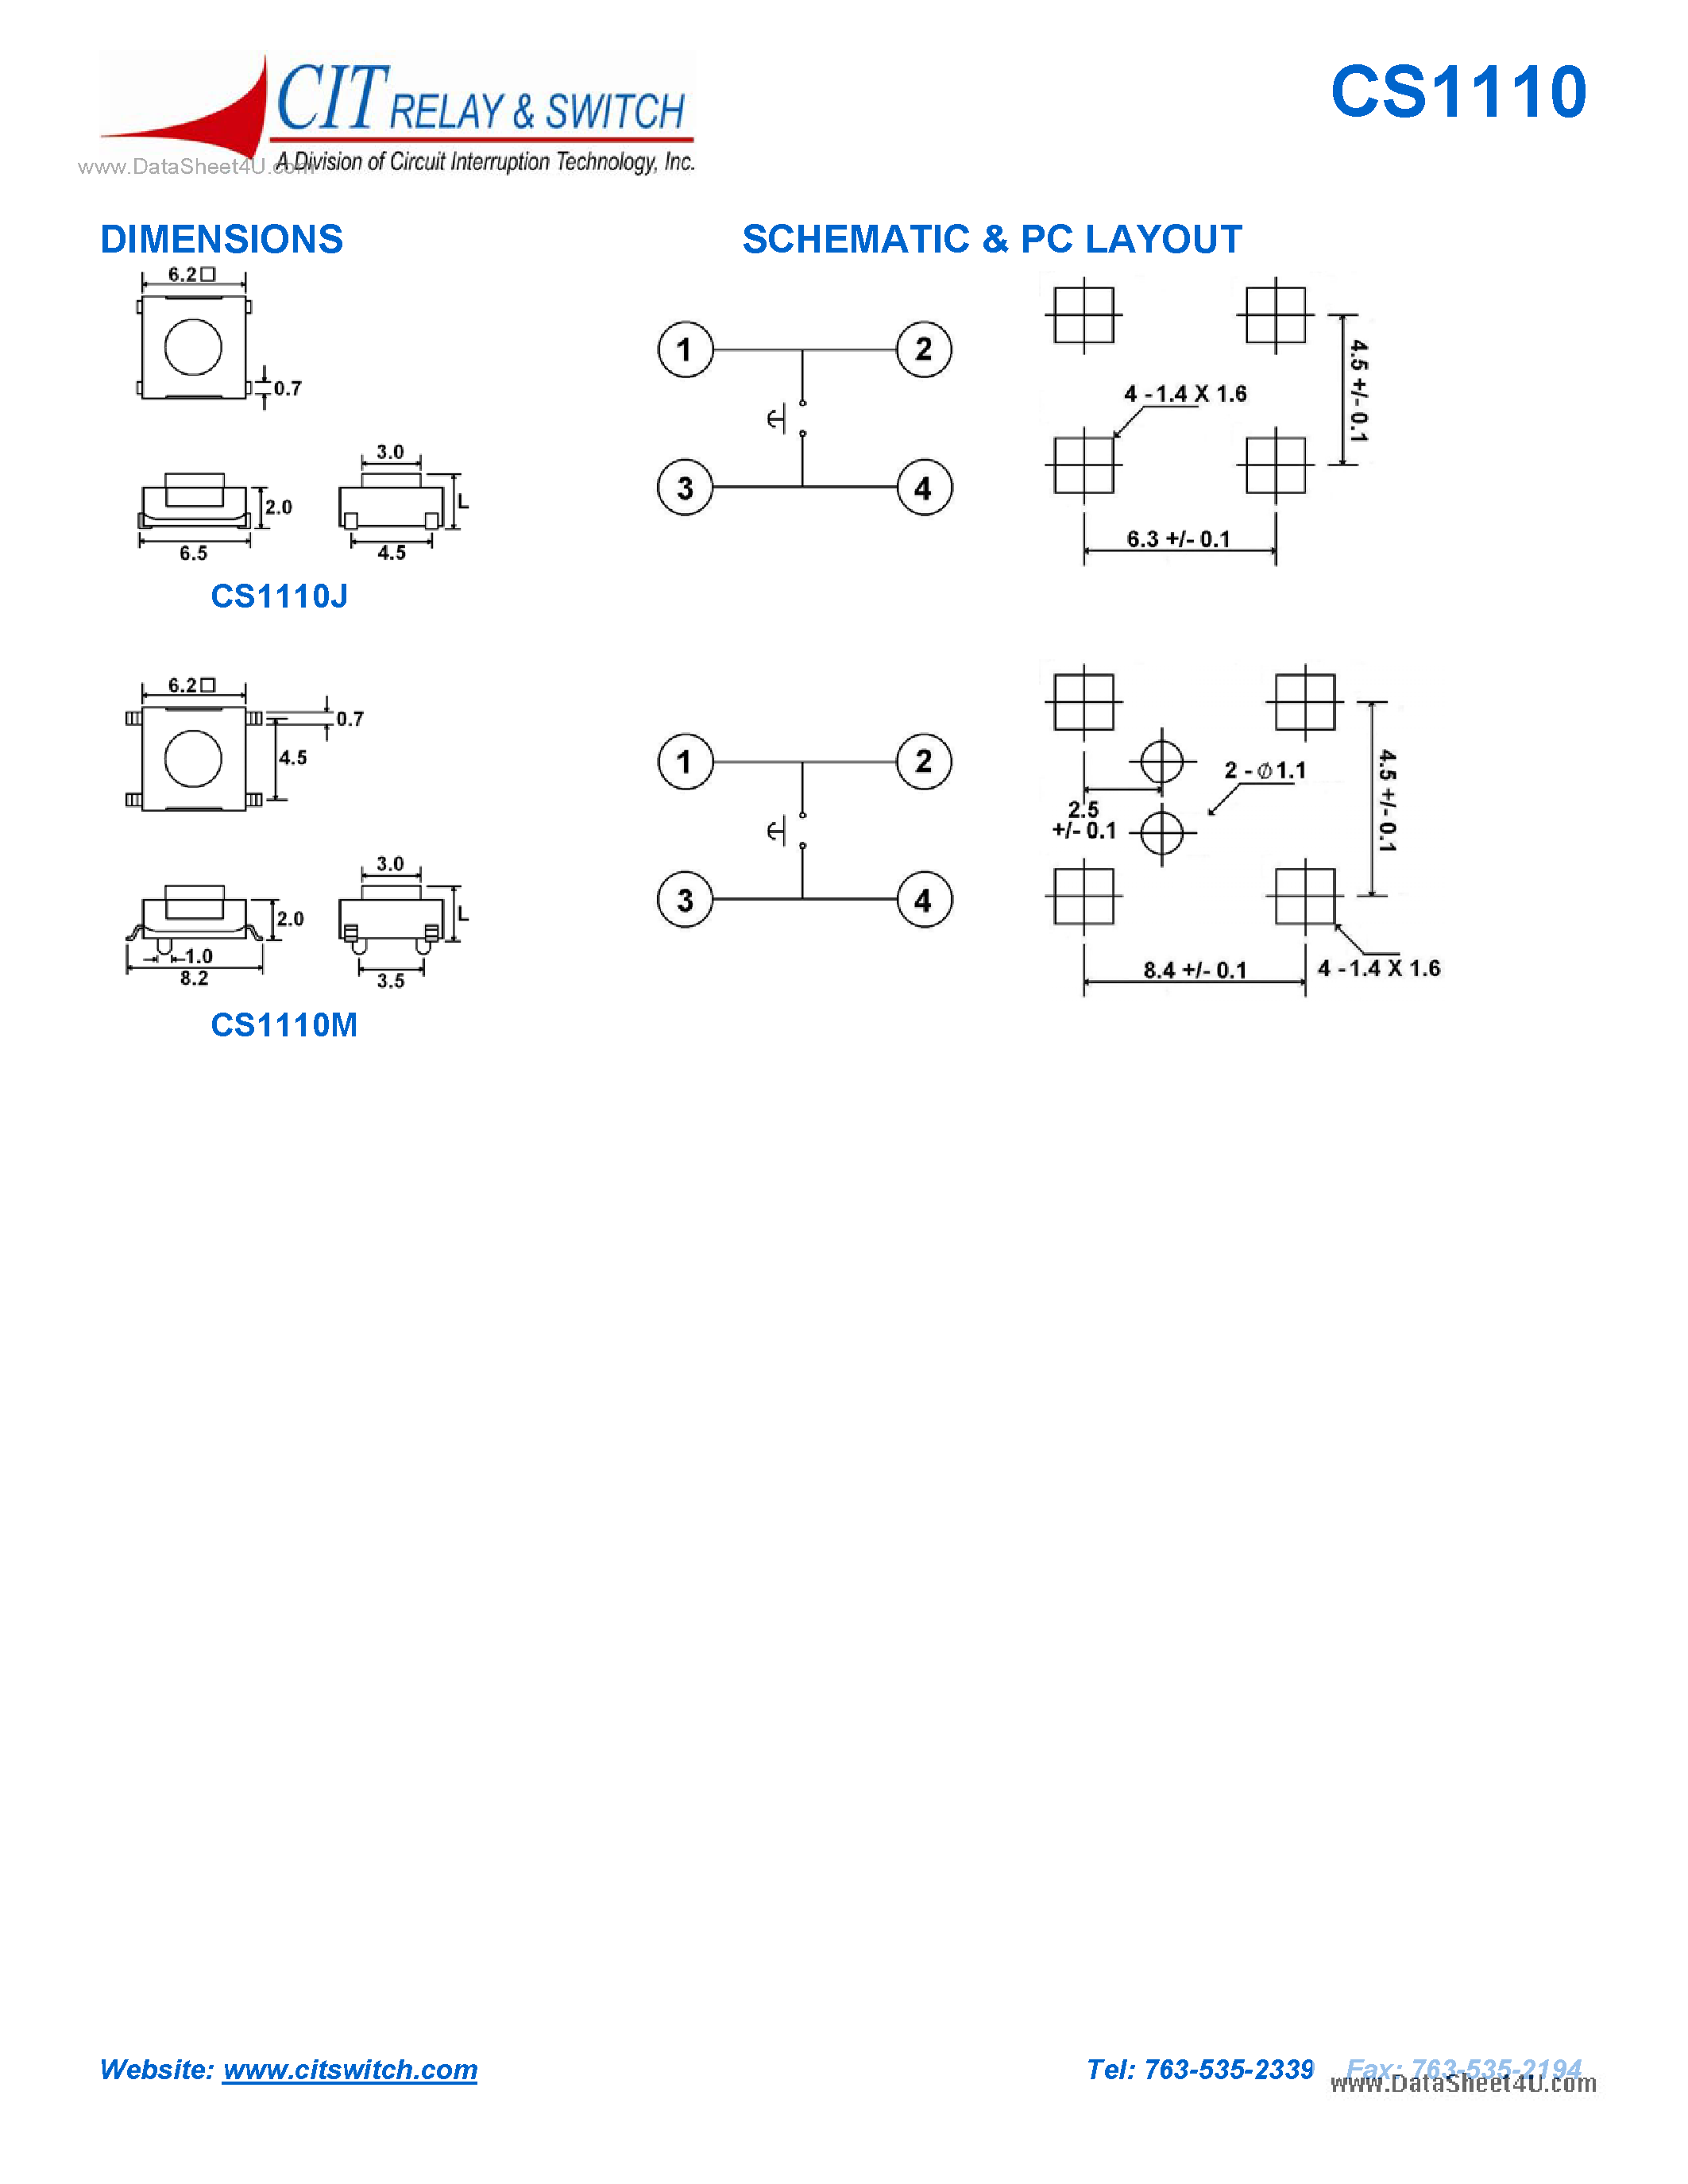 Datasheet CS1110 - DIMENSIONS SCHEMATIC & PC LAYOUT page 2